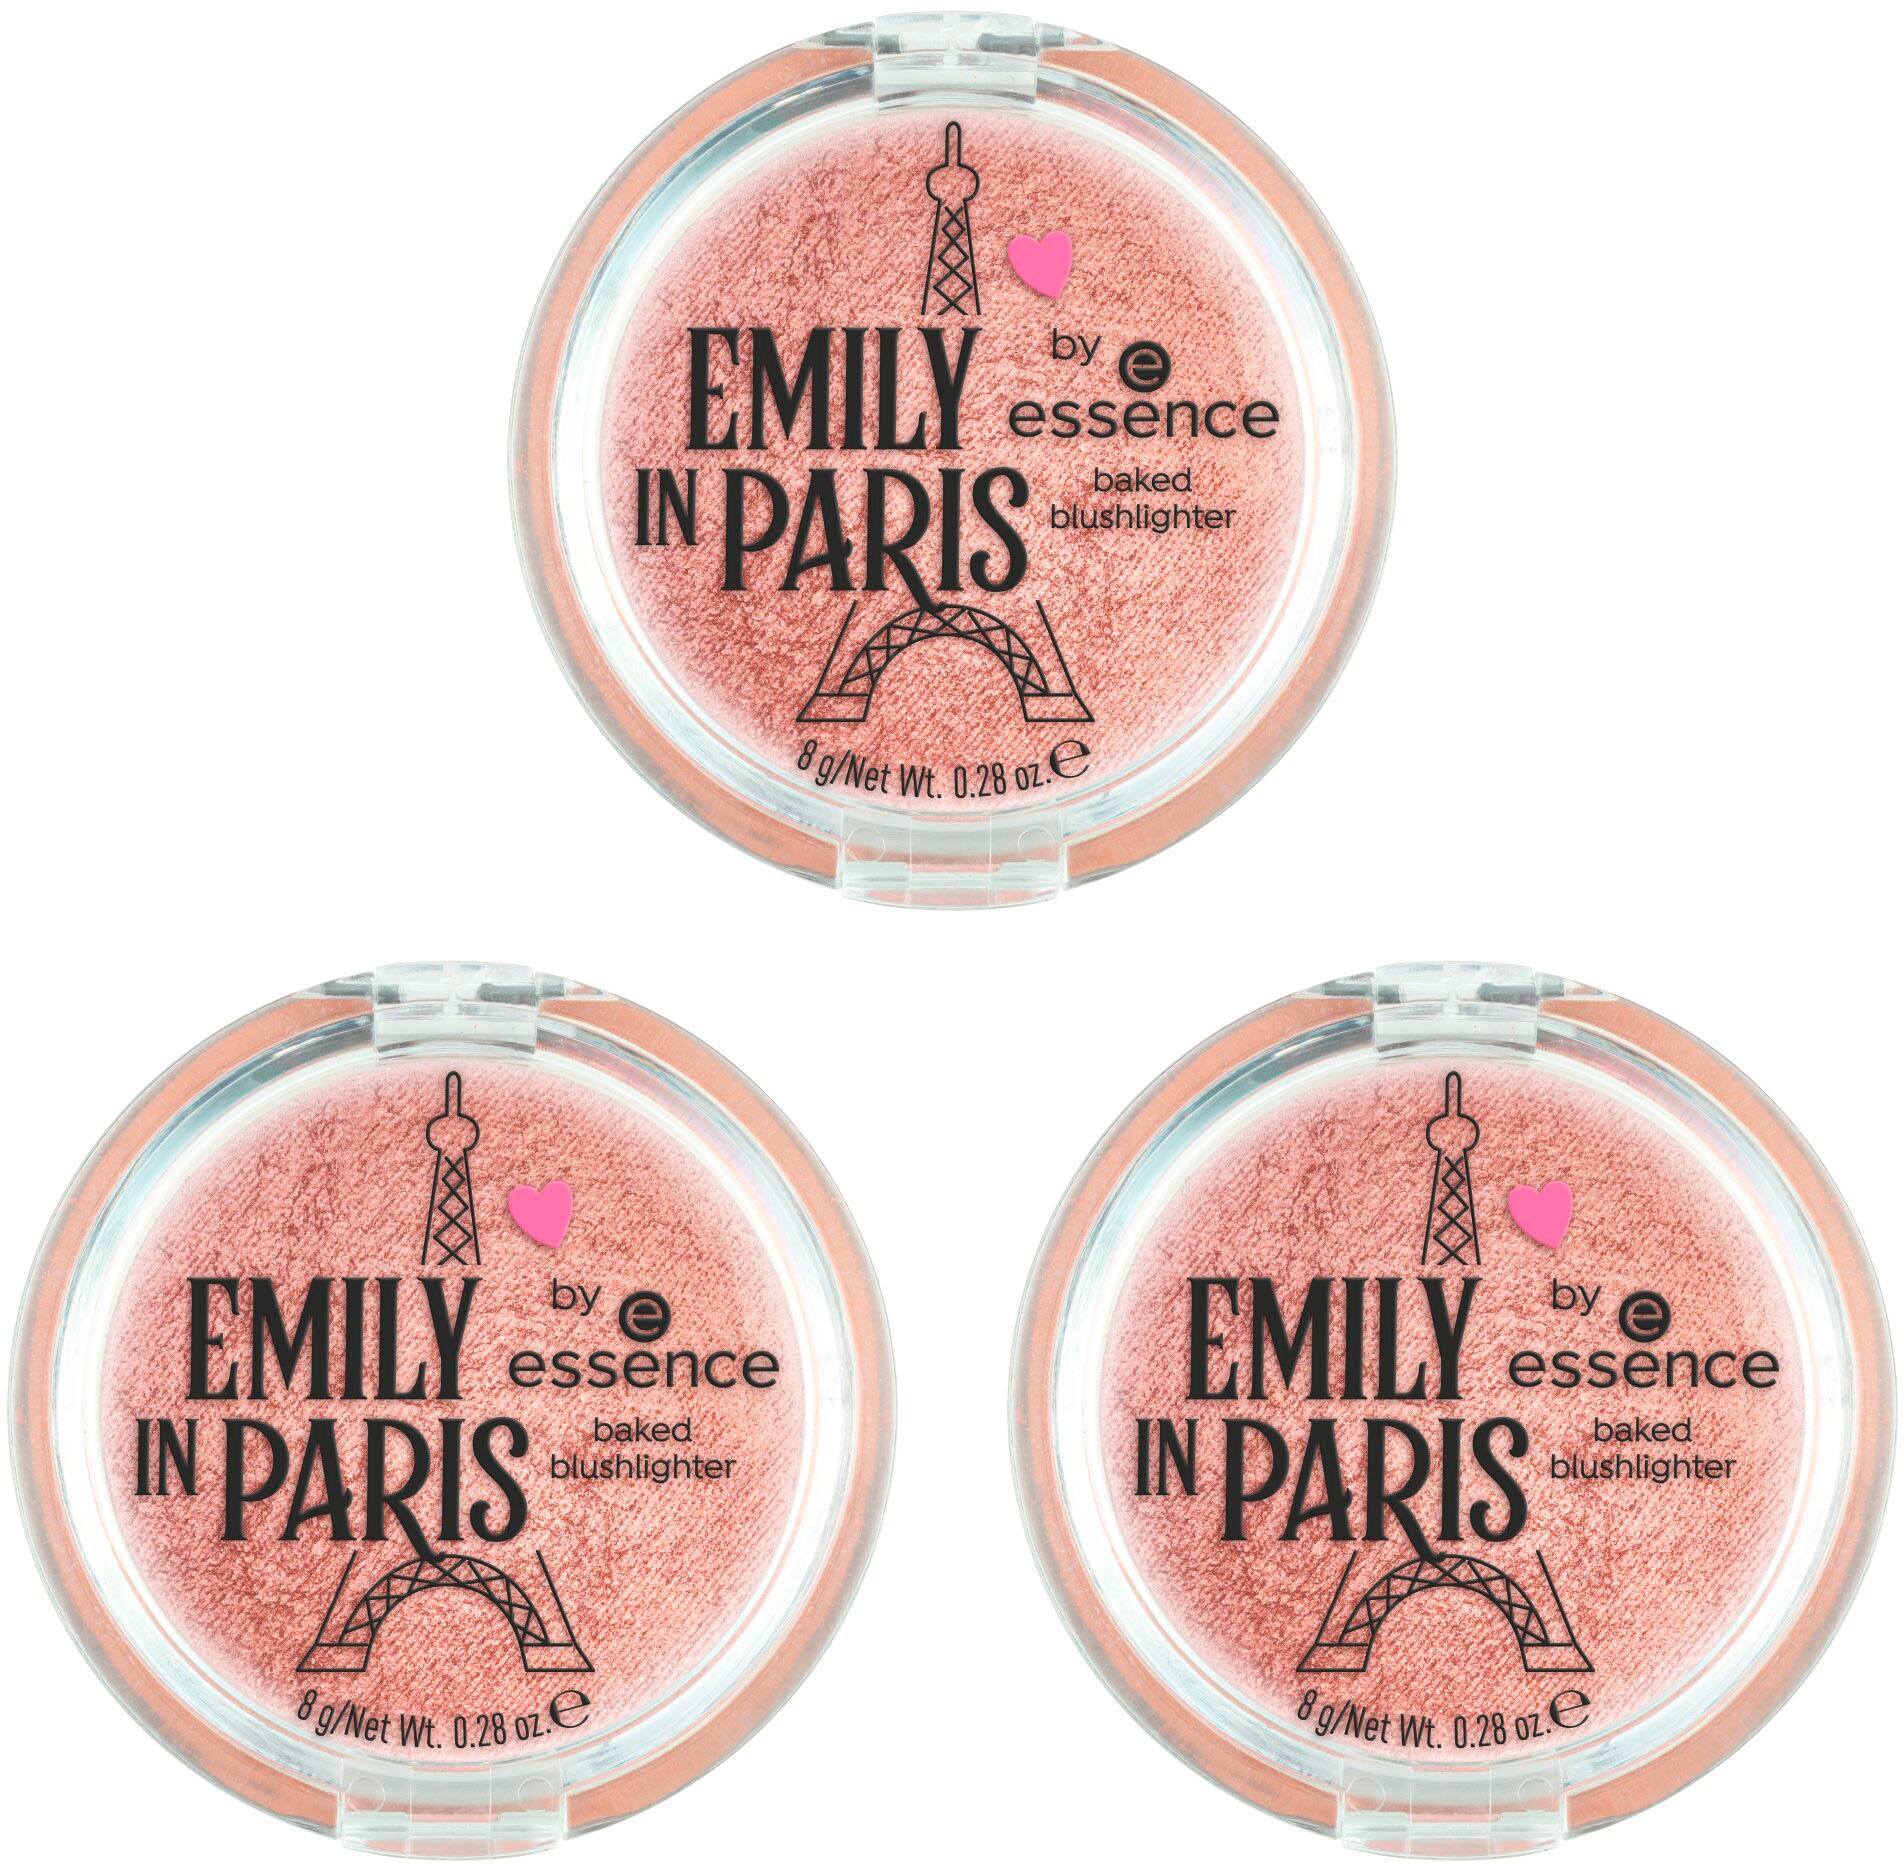 PARIS »EMILY blushlighter« Essence baked online bei essence by IN Rouge